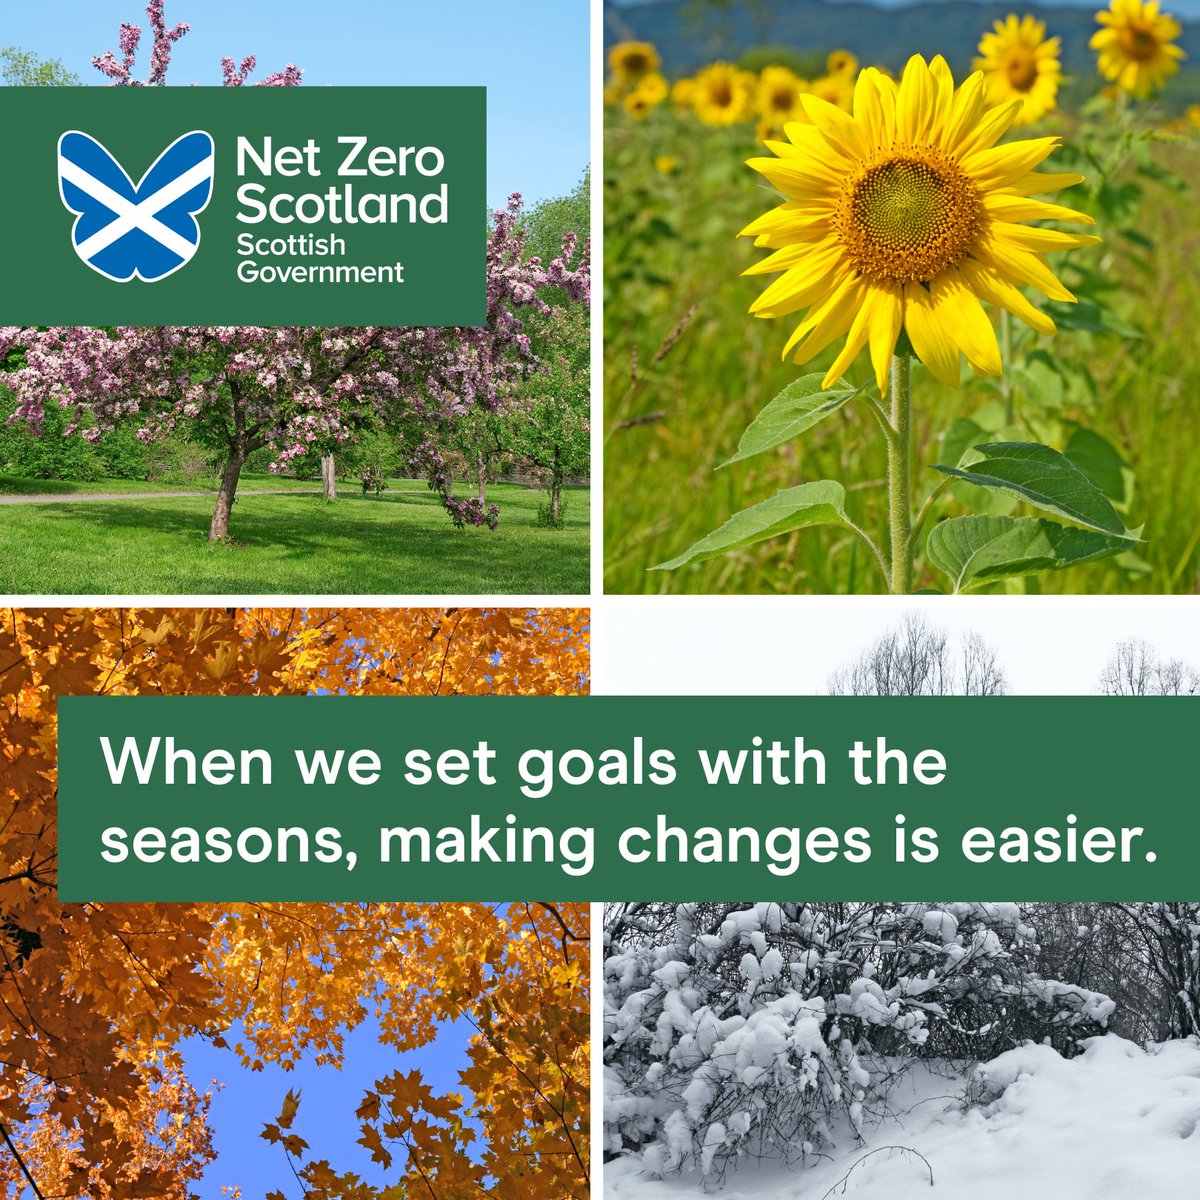 There are many ways that we can add to our lives while also helping to protect the planet, why not let Mother Nature set the tone for when to make these changes? For more information on changes you can make for you and the planet, visit: netzeronation.scot/take-action #LetsDoNetZero